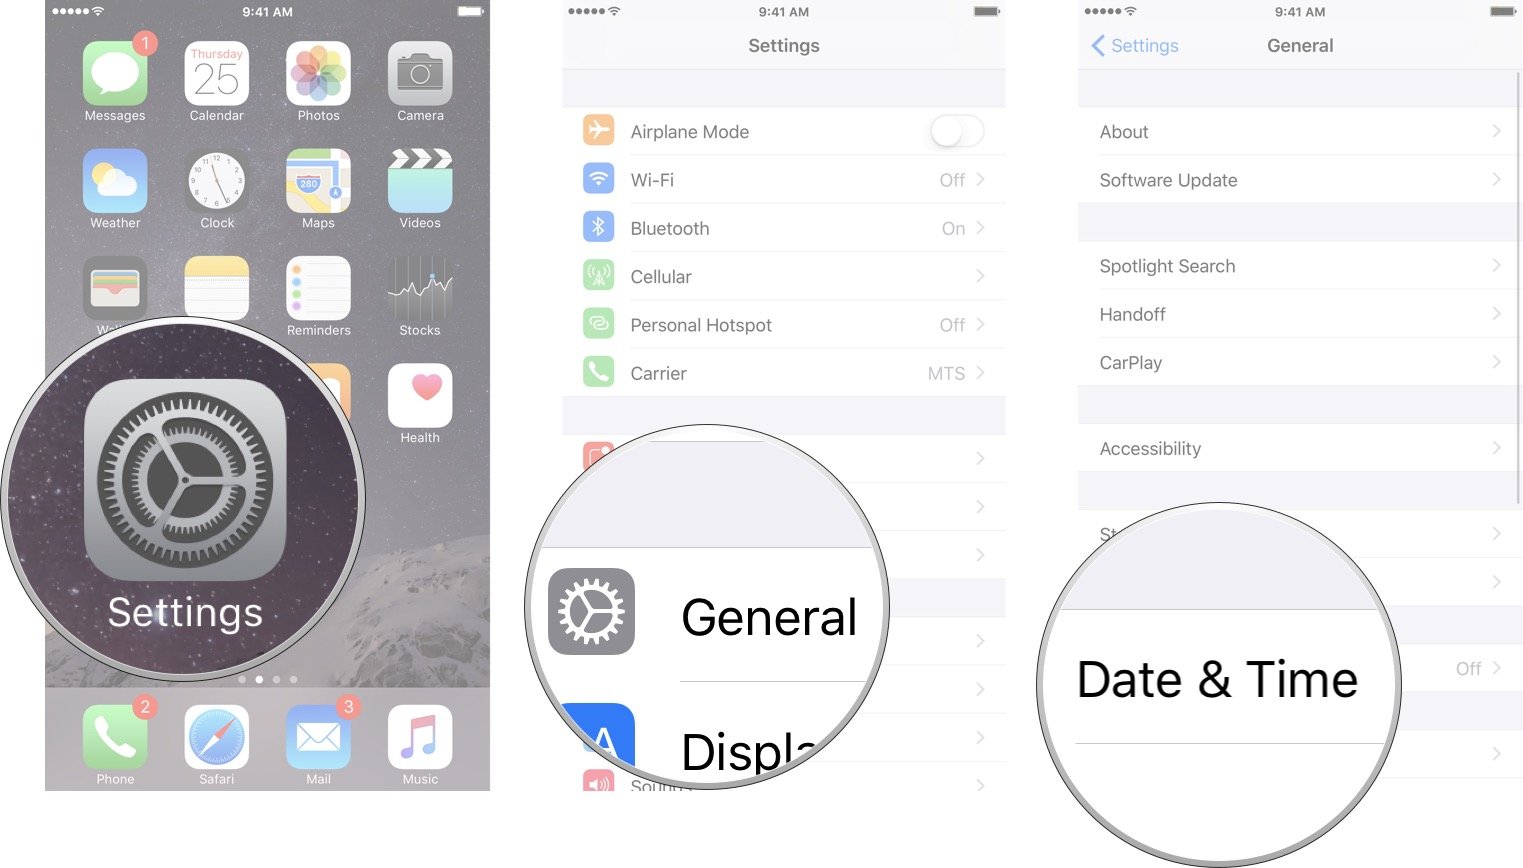 Launch the Settings app, tap General, and then tap on Date & Time.